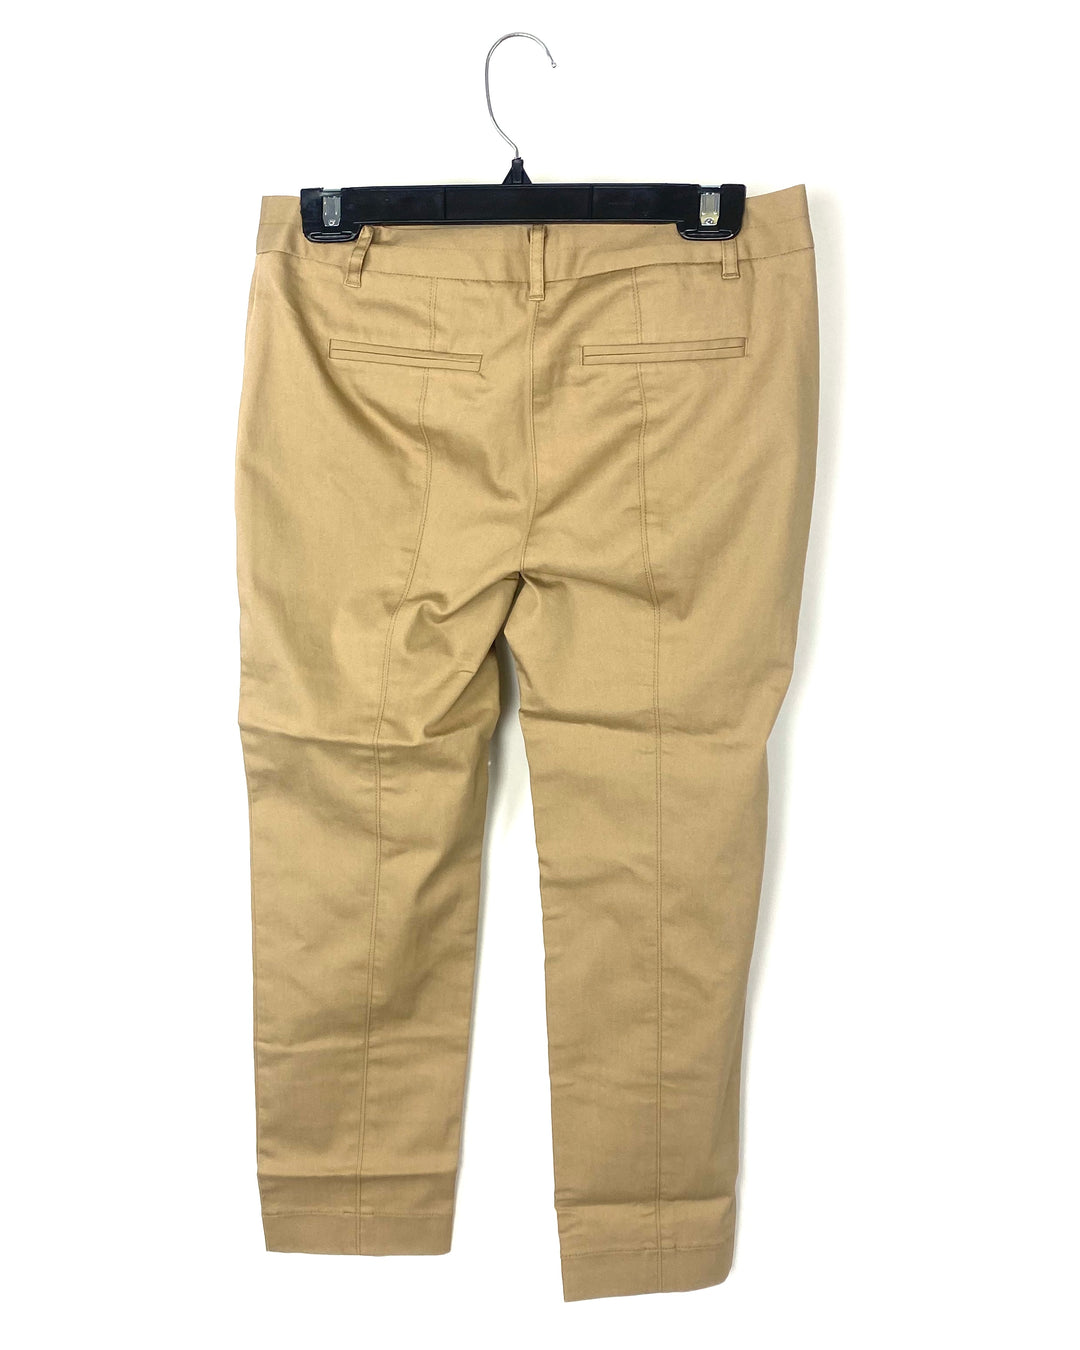 Khaki Trousers - Size 4, 6 and 8